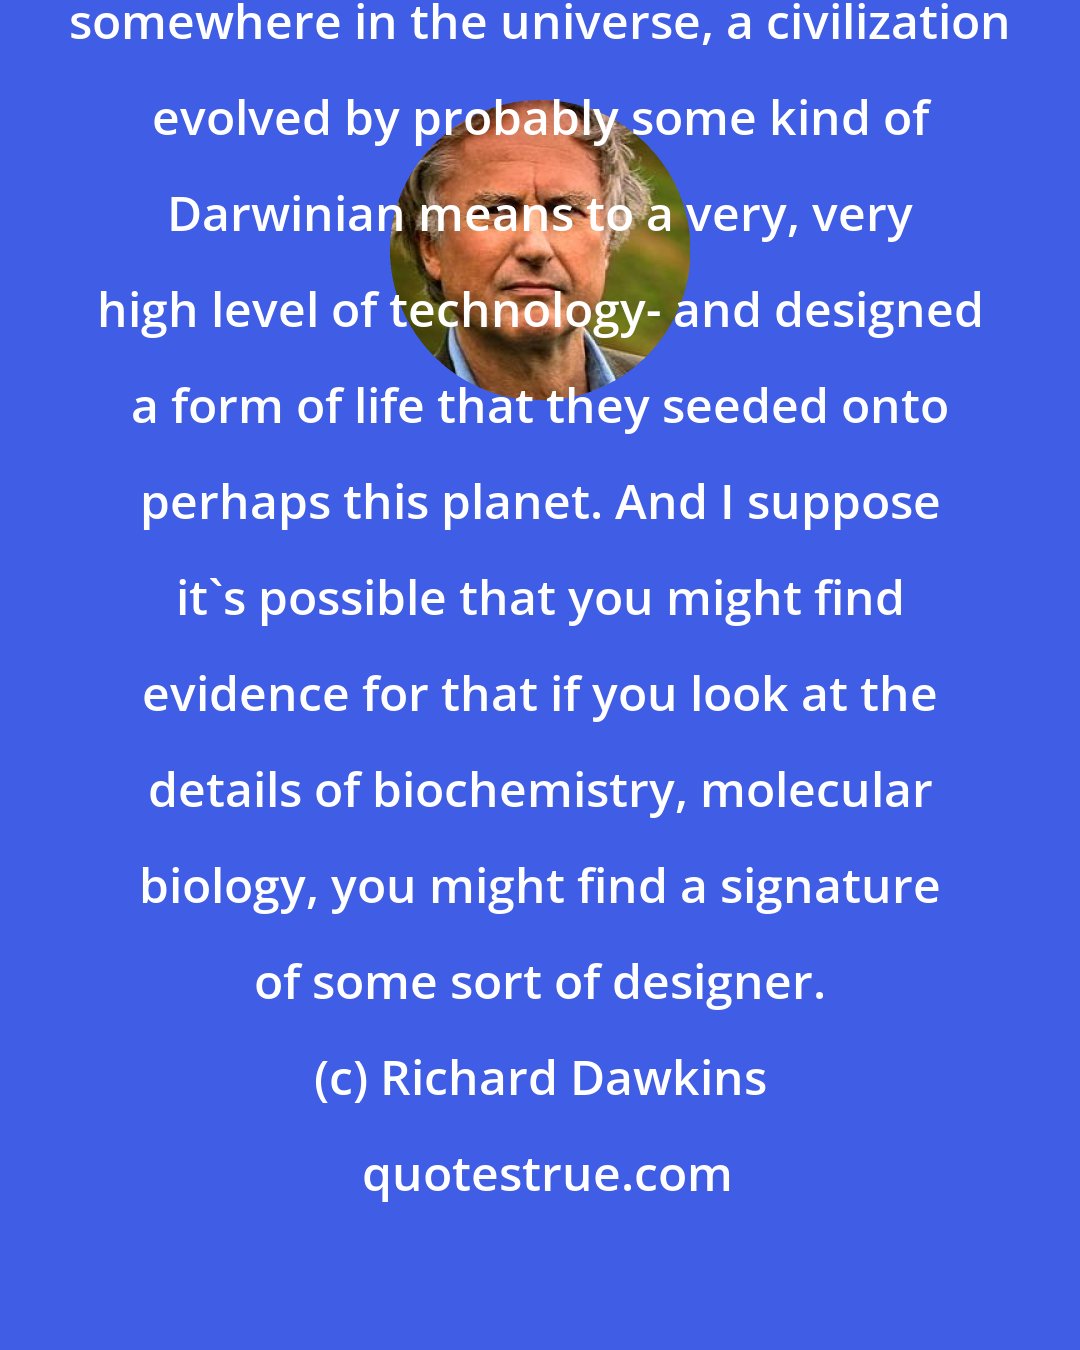 Richard Dawkins: It could be that at some earlier time, somewhere in the universe, a civilization evolved by probably some kind of Darwinian means to a very, very high level of technology- and designed a form of life that they seeded onto perhaps this planet. And I suppose it's possible that you might find evidence for that if you look at the details of biochemistry, molecular biology, you might find a signature of some sort of designer.